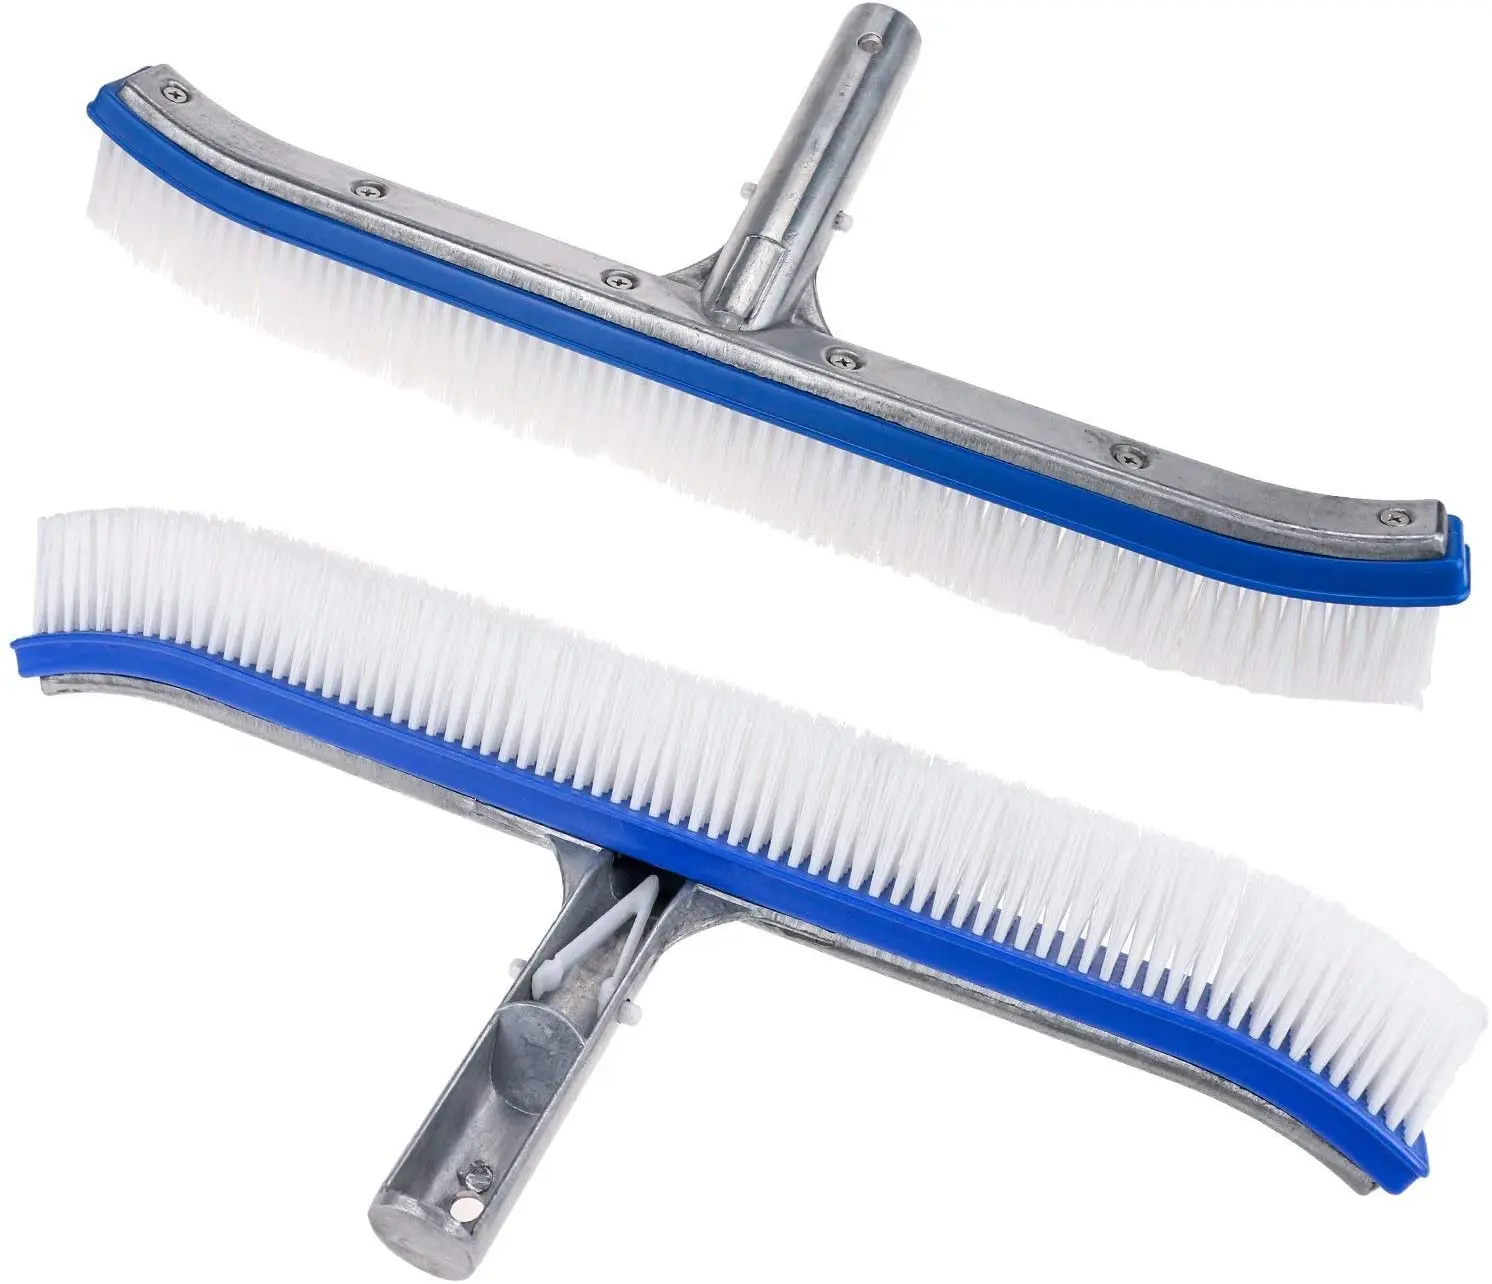 

18" Strong Aluminium Heavy Duty Pool Cleaning Brush for Swimming Pool Wall, Blue